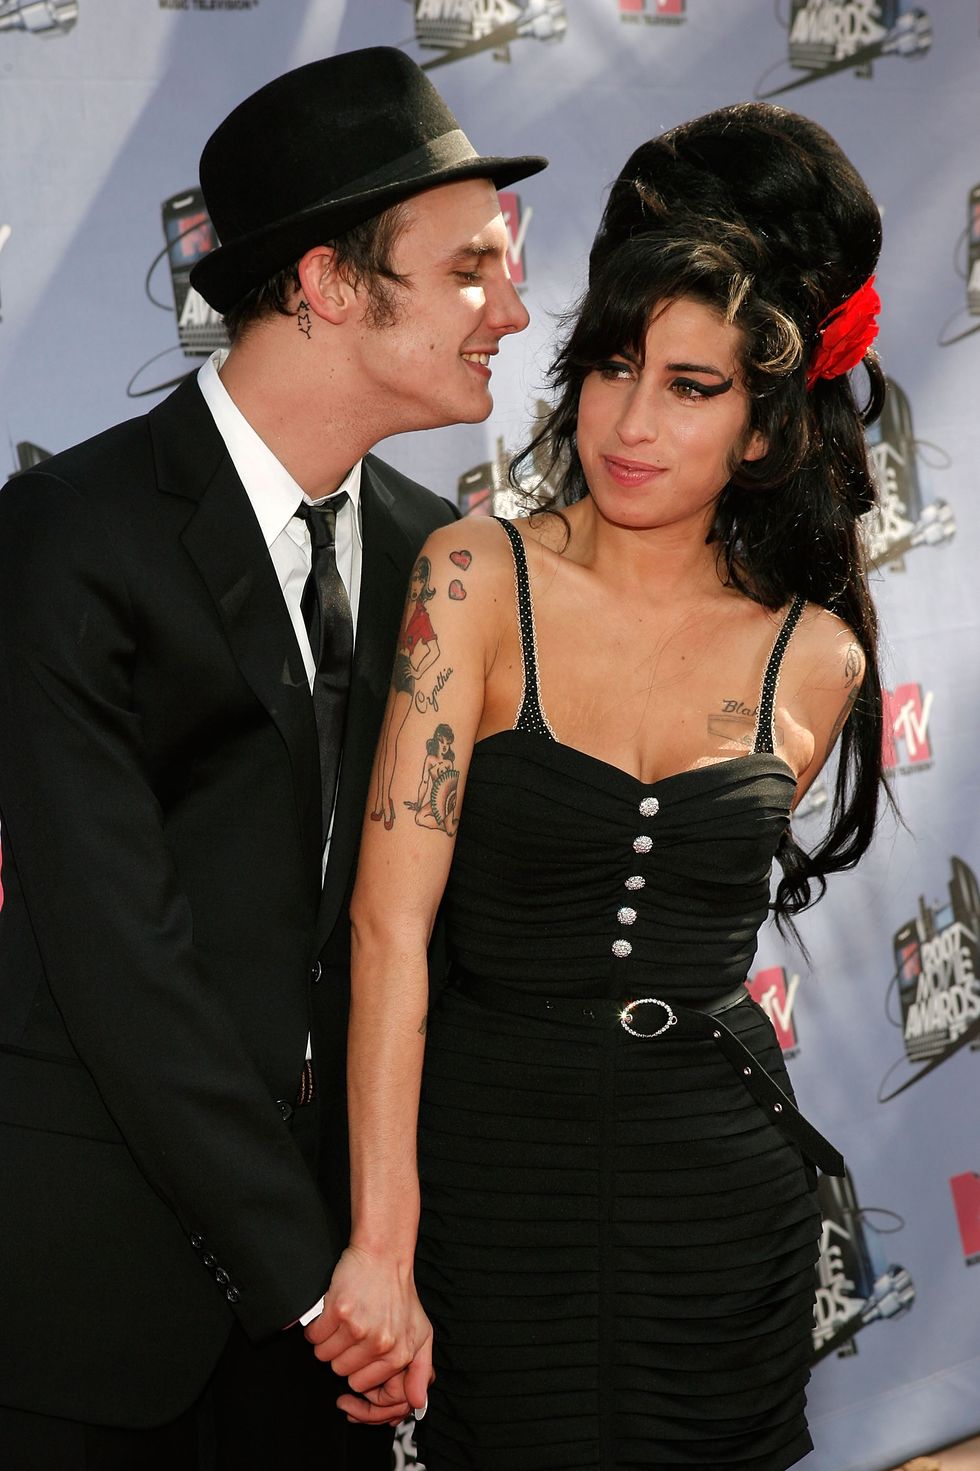 blake fielder civil and amy winehouse stand together in front of lavender photo backdrop with logos, he looks at her and smiles and she looks to the left and smiles, they hold hands and both wear black outfits